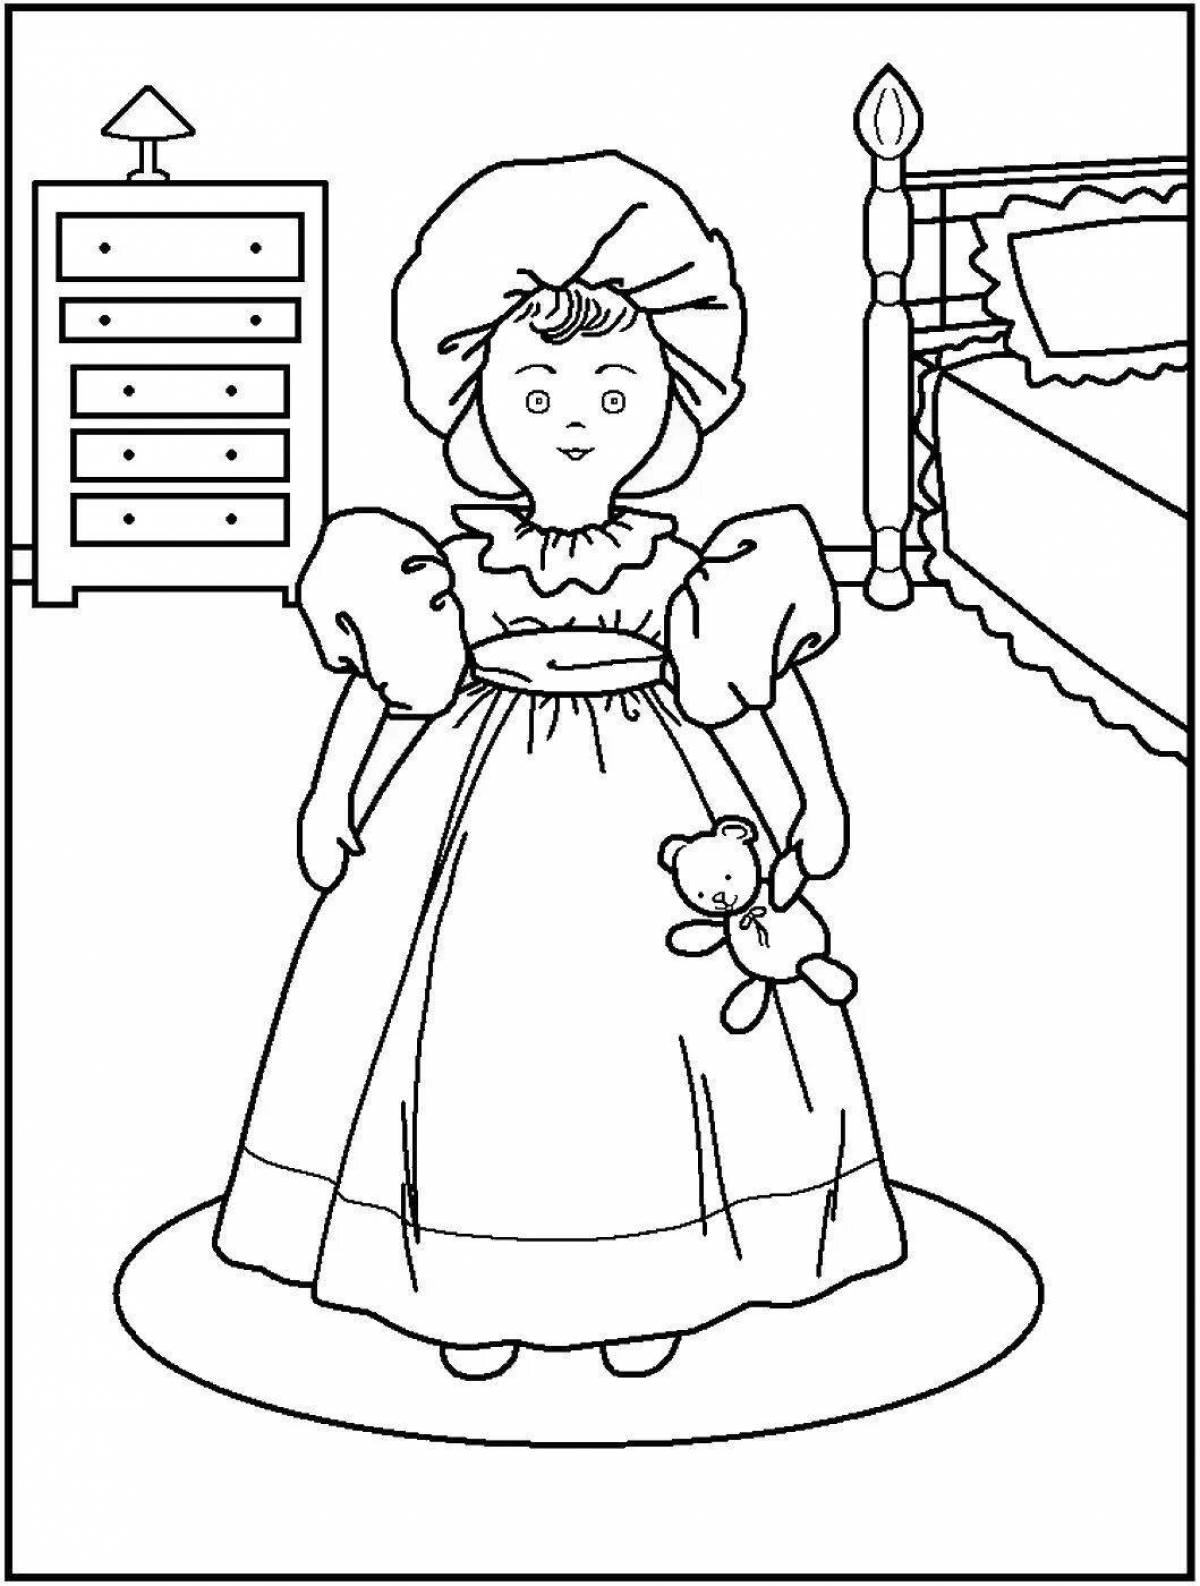 Anabelle's mysterious coloring page